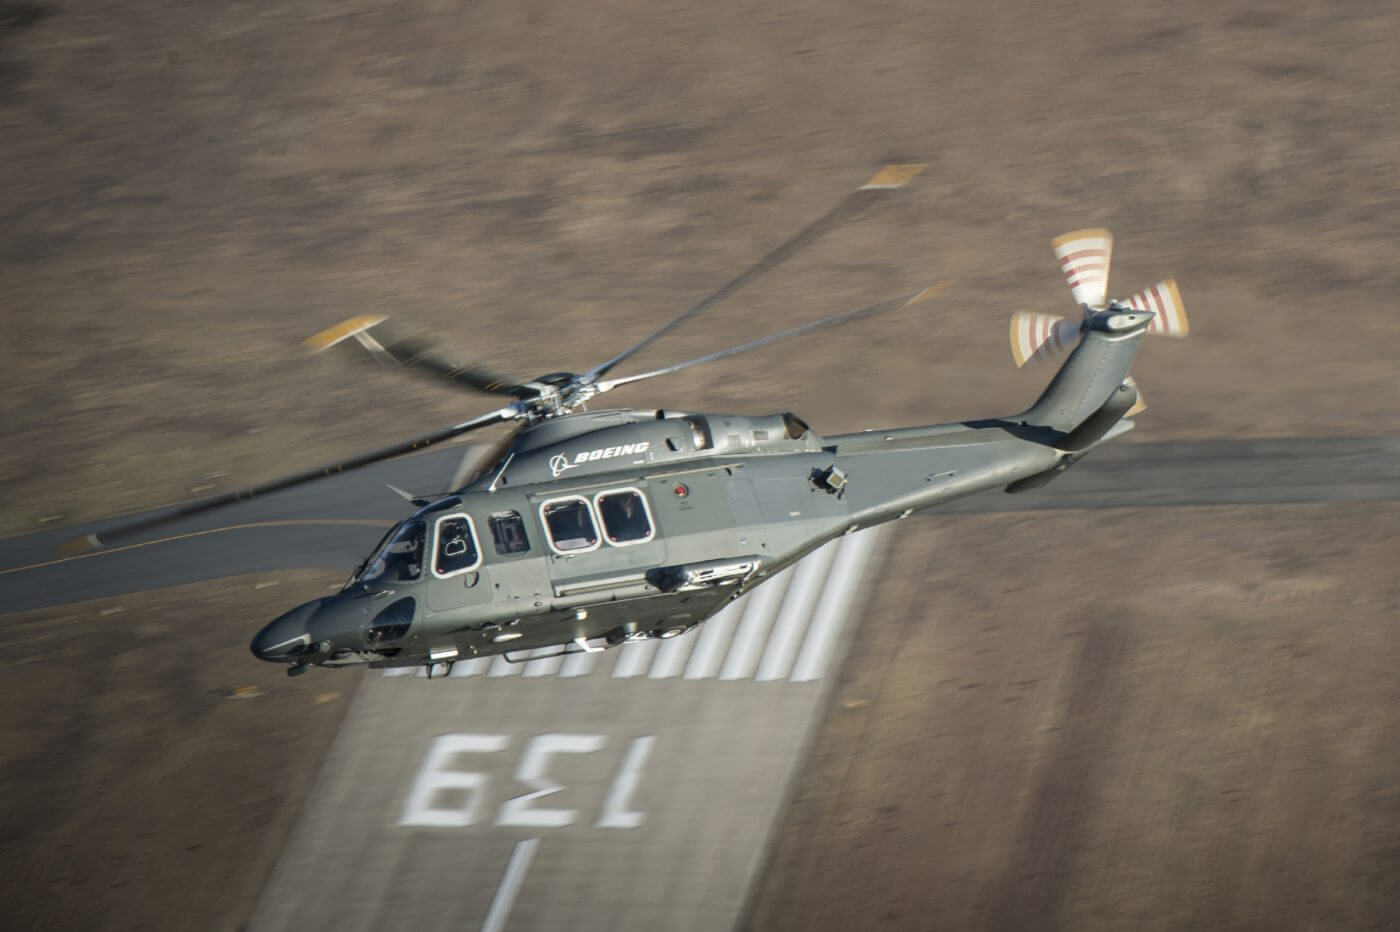 Boeing will provide its MH-139 helicopter and related support to the U.S. Air Force.